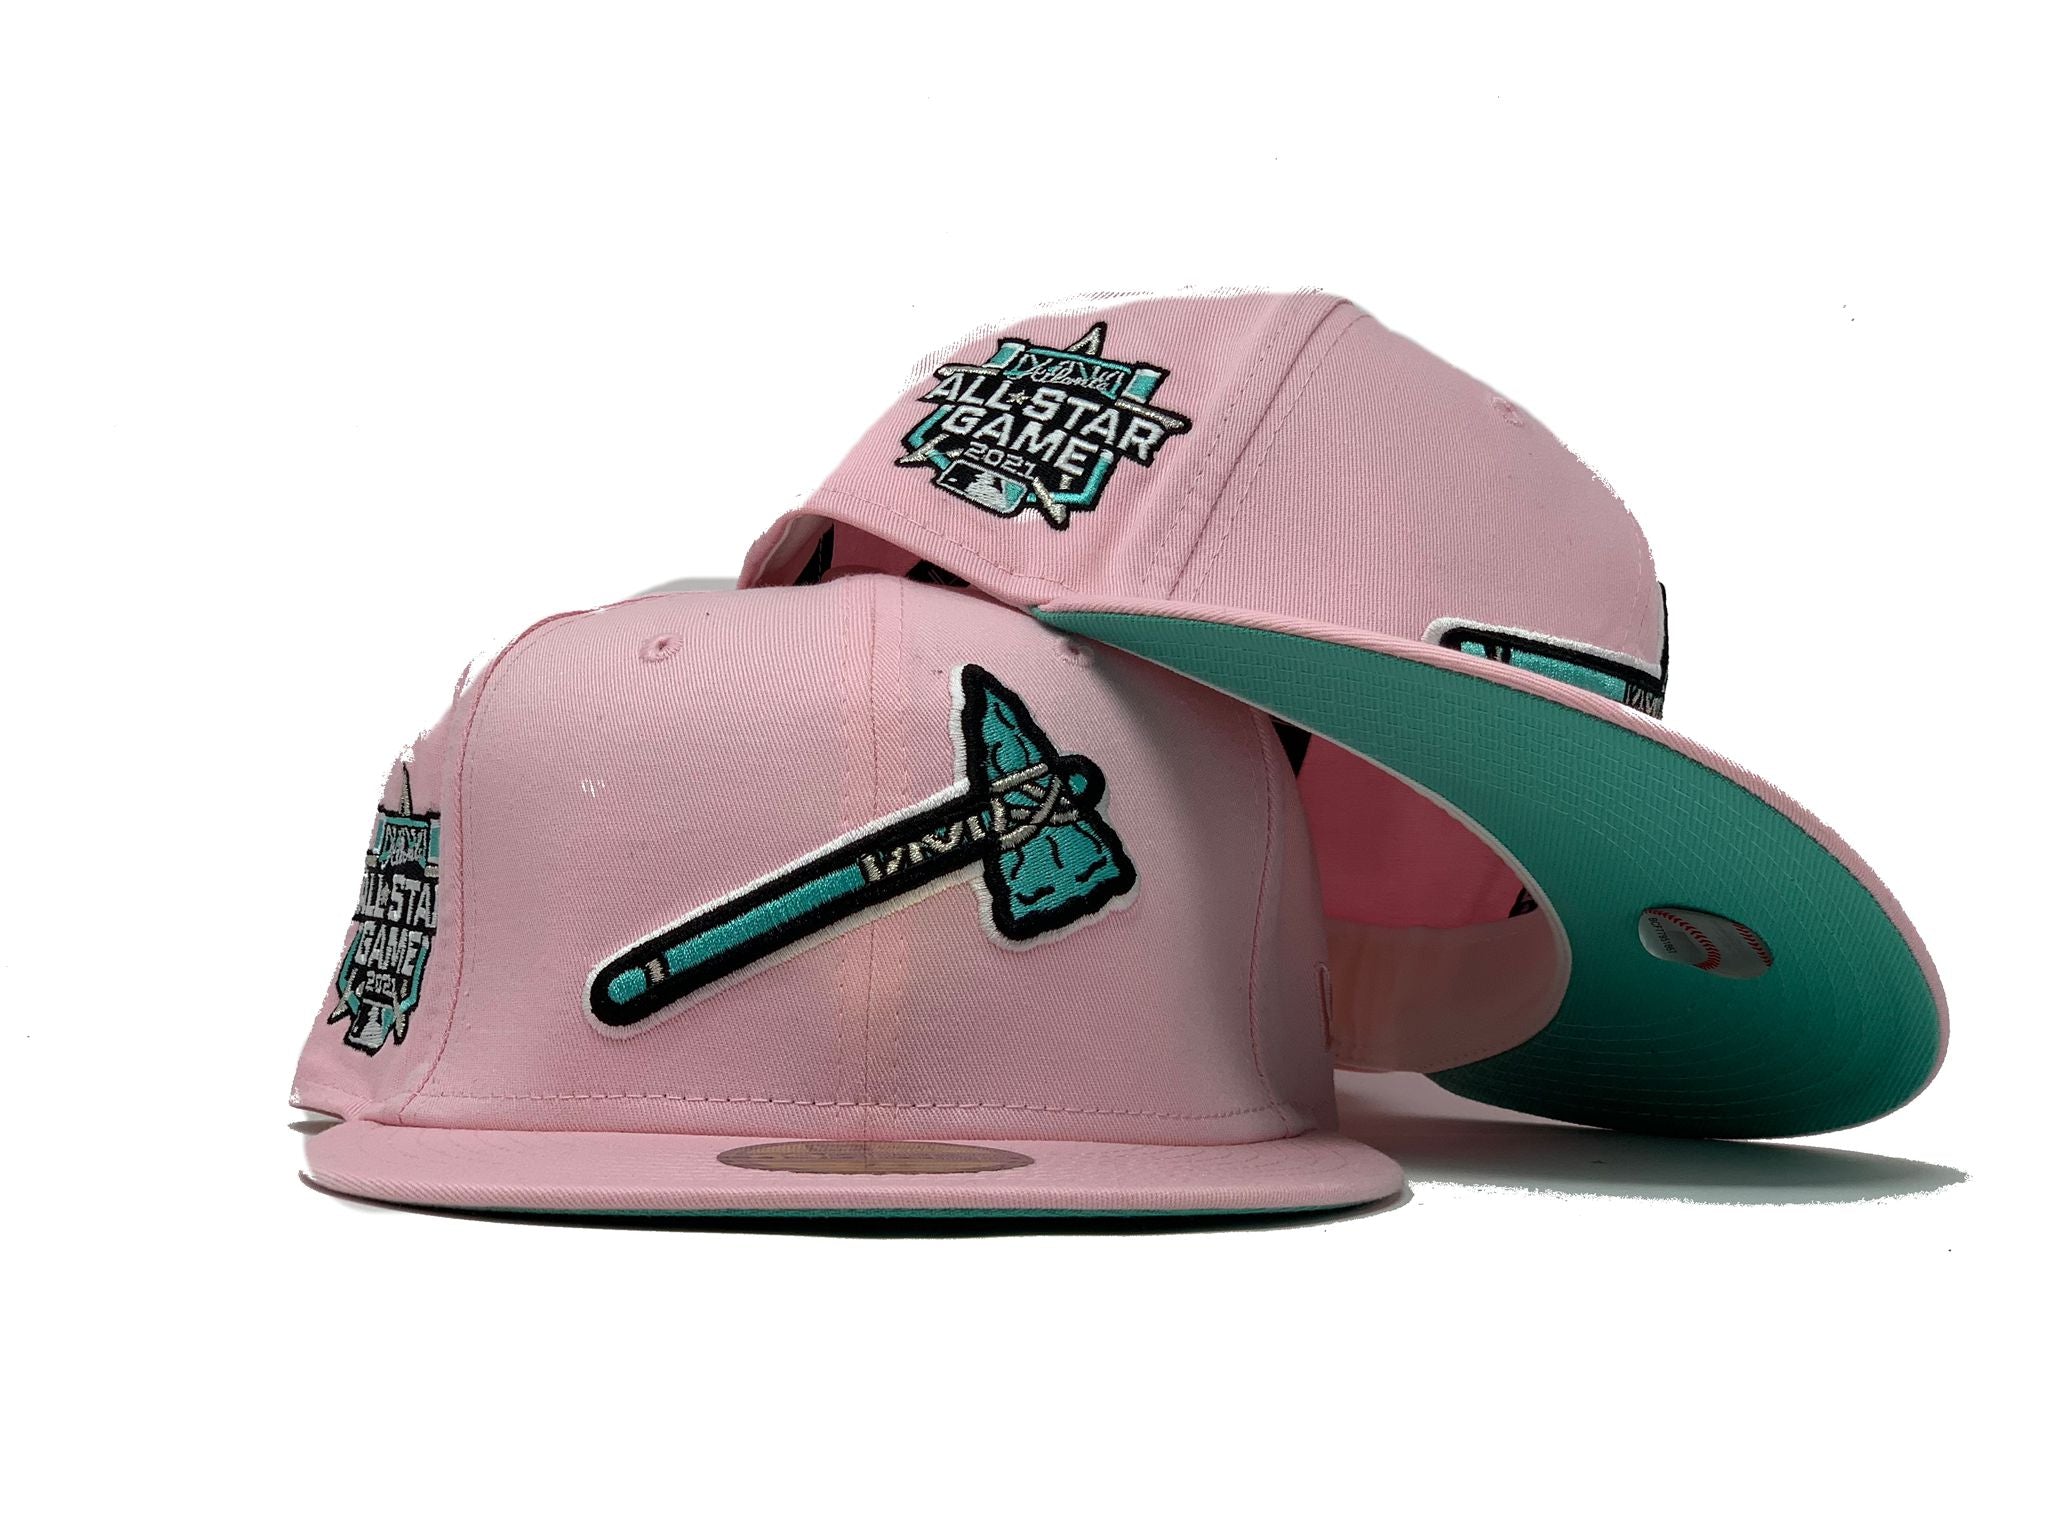 KTZ White, Pink Atlanta Braves Chrome Rogue 59fifty Fitted Hat for Men